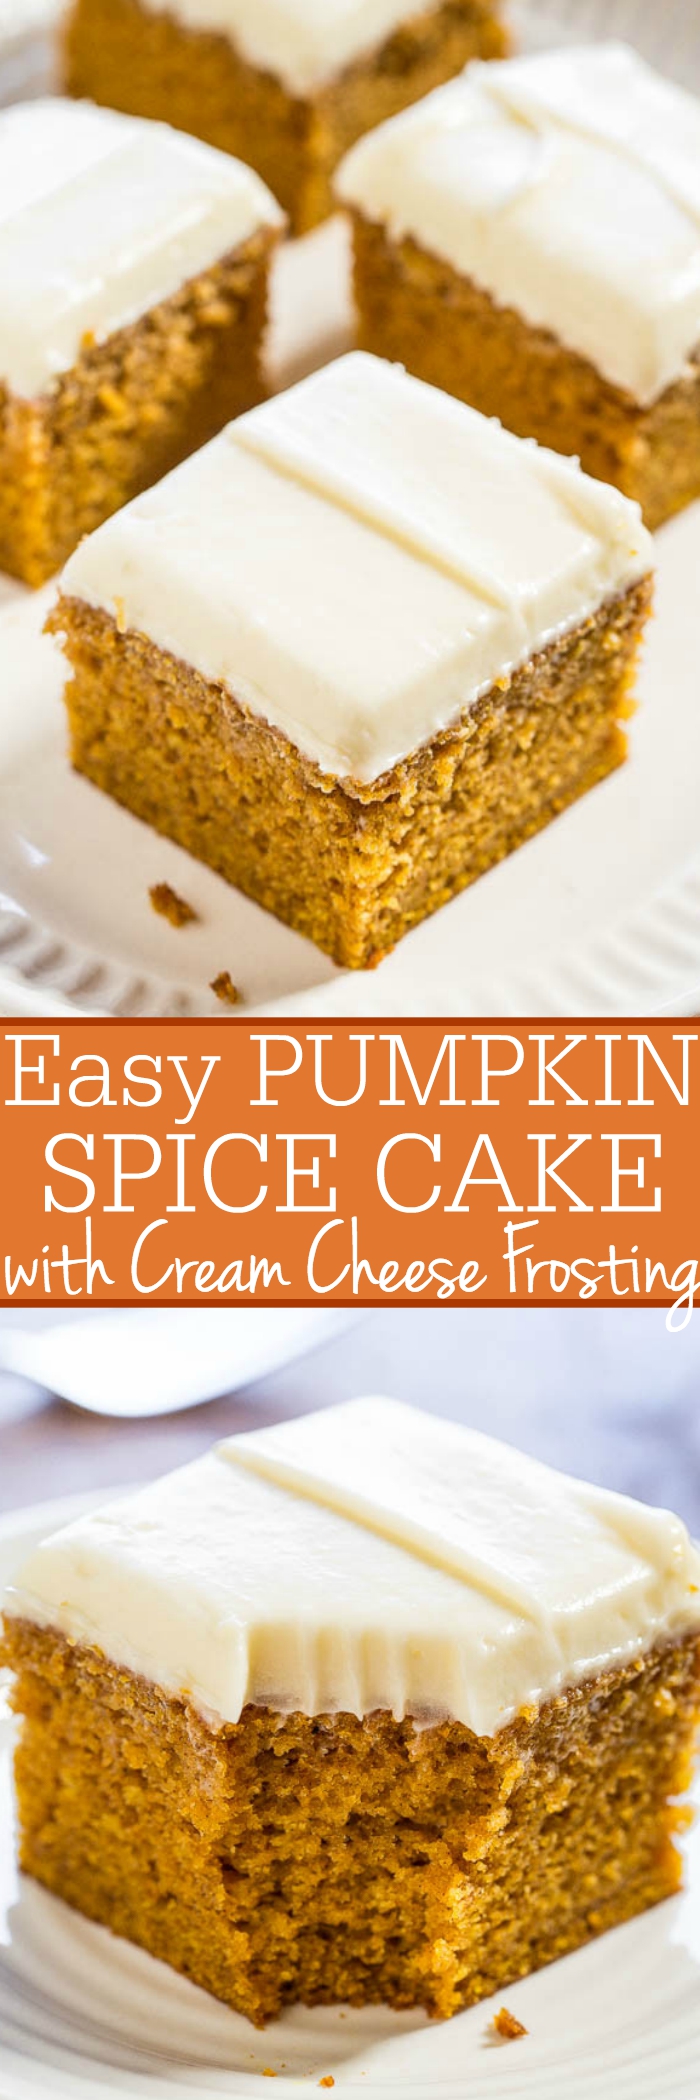 Pumpkin Spice Cake with Cream Cheese Frosting — Moist pumpkin cake is topped with a creamy homemade cream cheese frosting. This easy fall dessert is perfect for Thanksgiving, Halloween, and more!